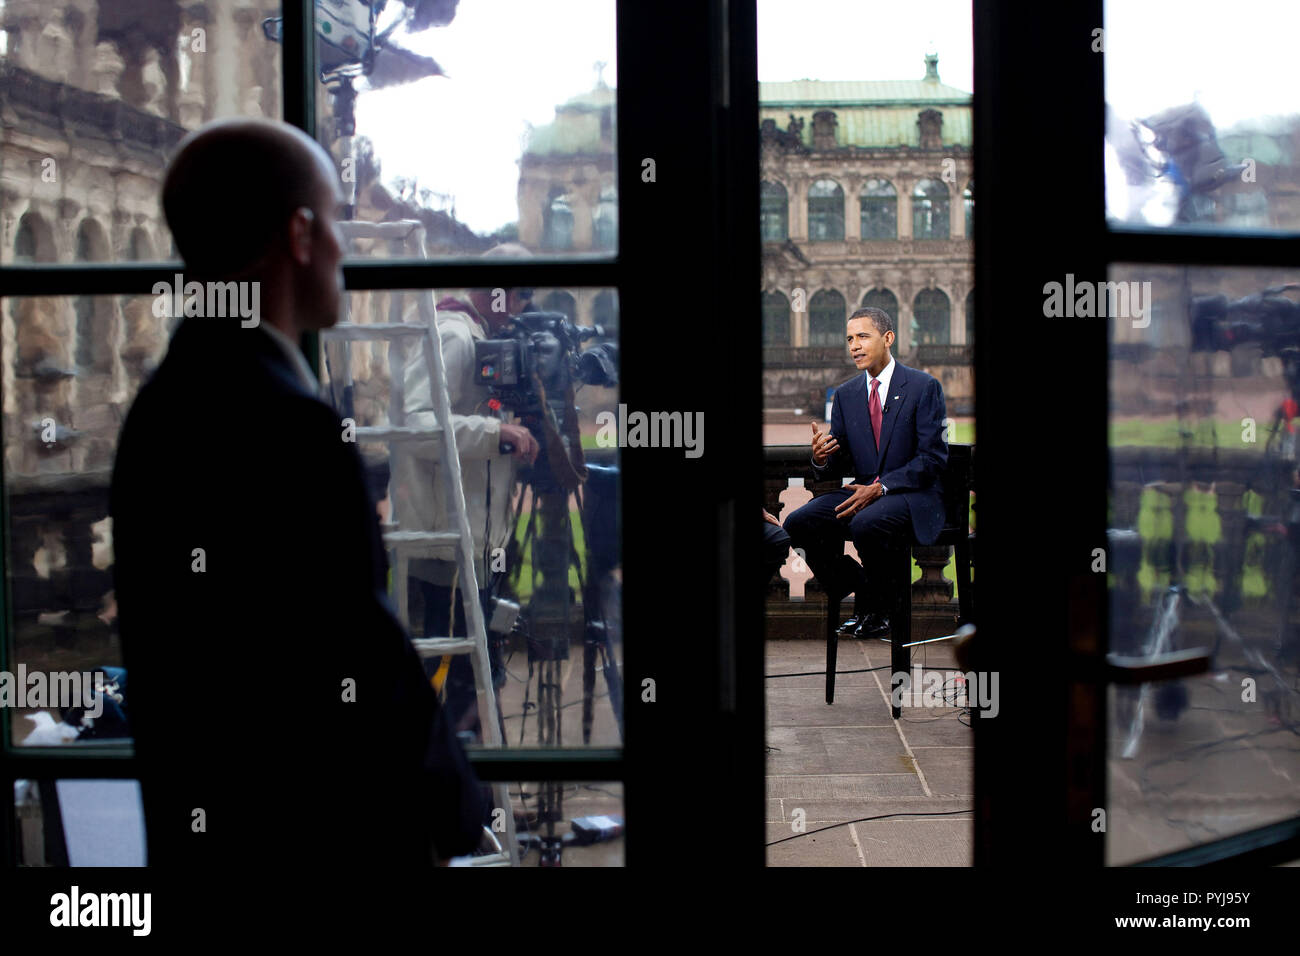 President Barack Obama is interviewed by Tom Brokaw at Zwinger Palace in Dresden, Germany, June 5, 2009. Stock Photo